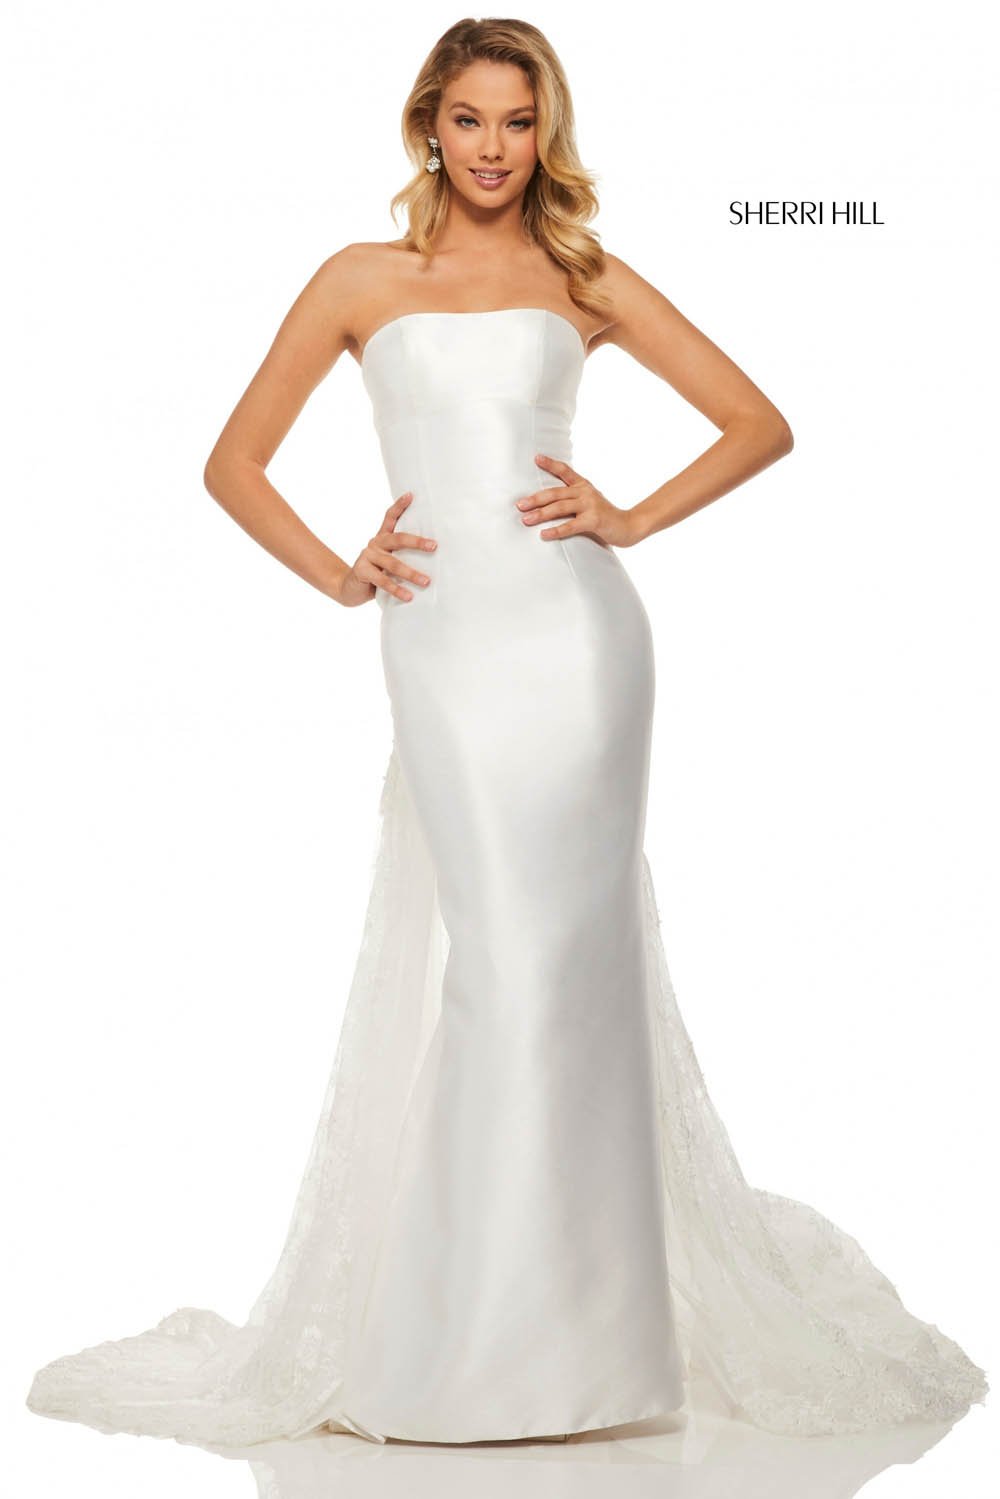 Sherri Hill 52594 dress images in these colors: Ivory.